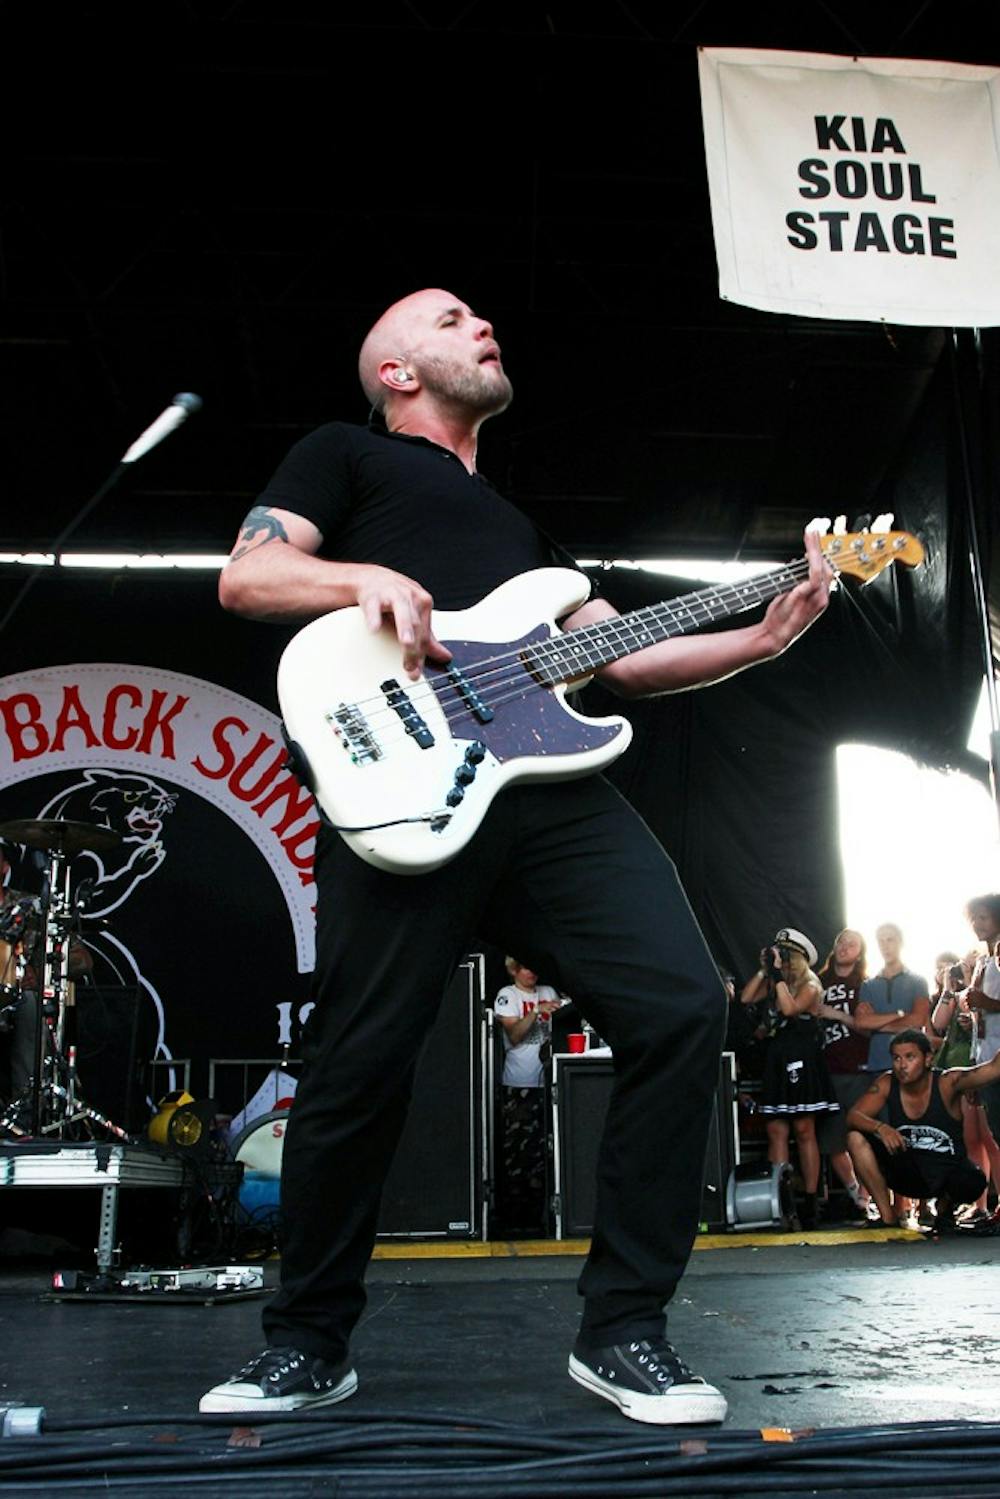 Taking Back Sunday frontman says Brand New's Jesse Lacey is “just